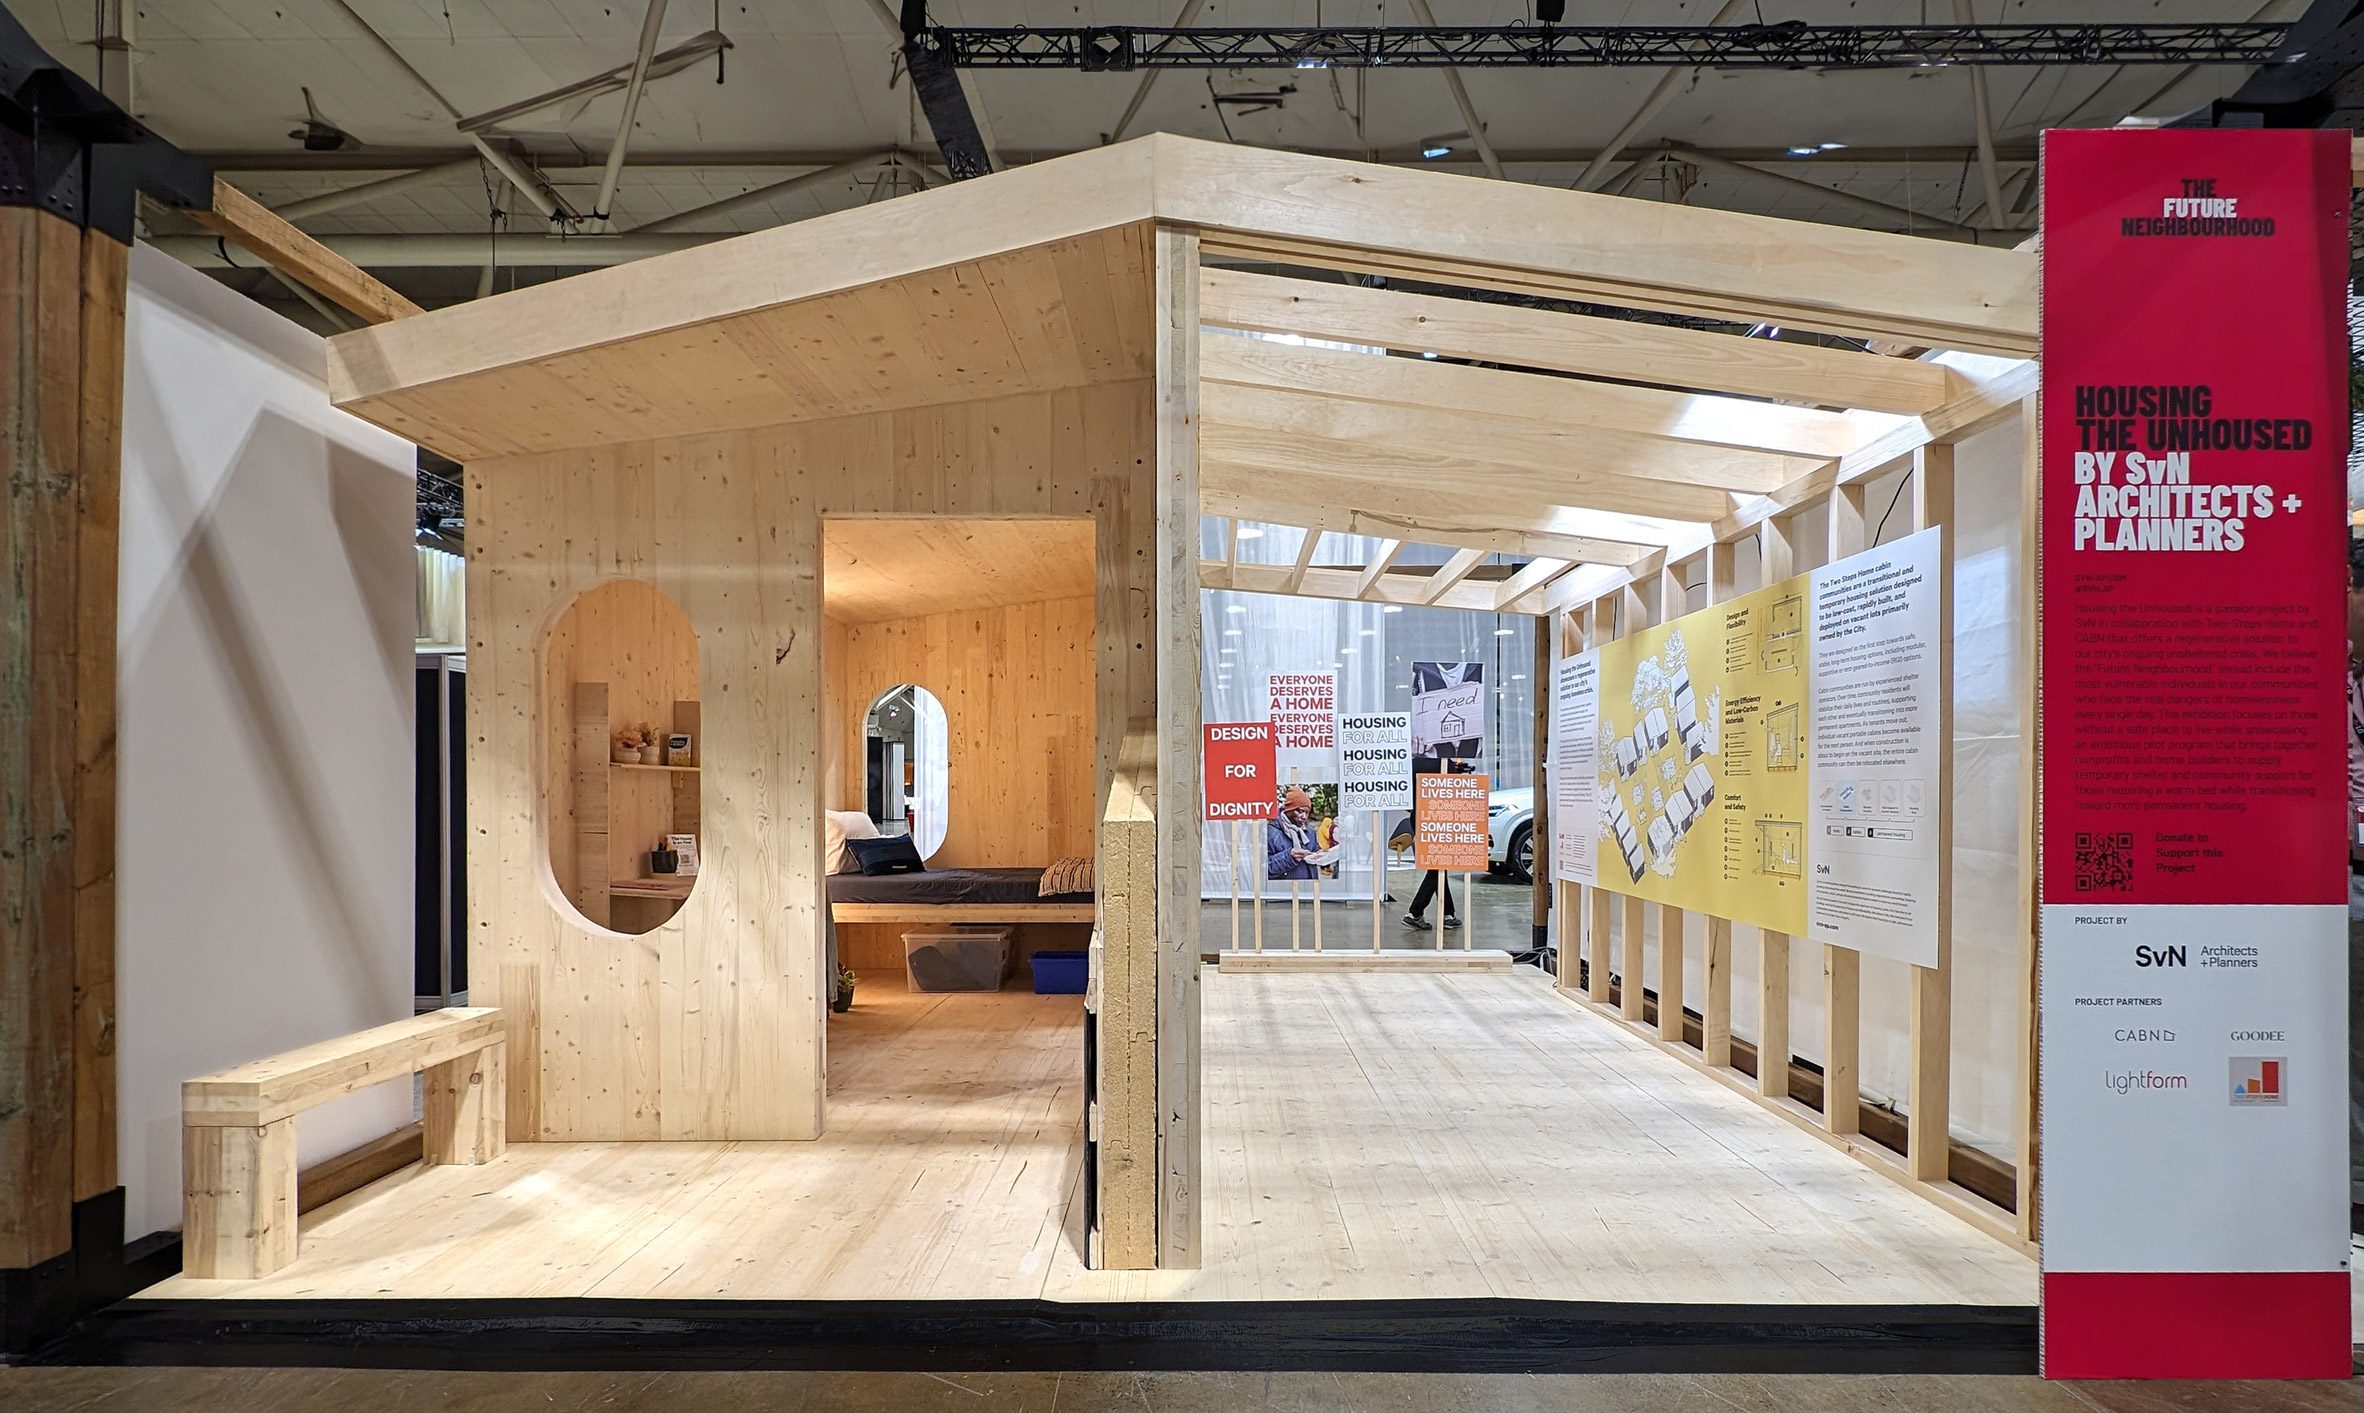 Cross laminated timber cabin for unhoused people